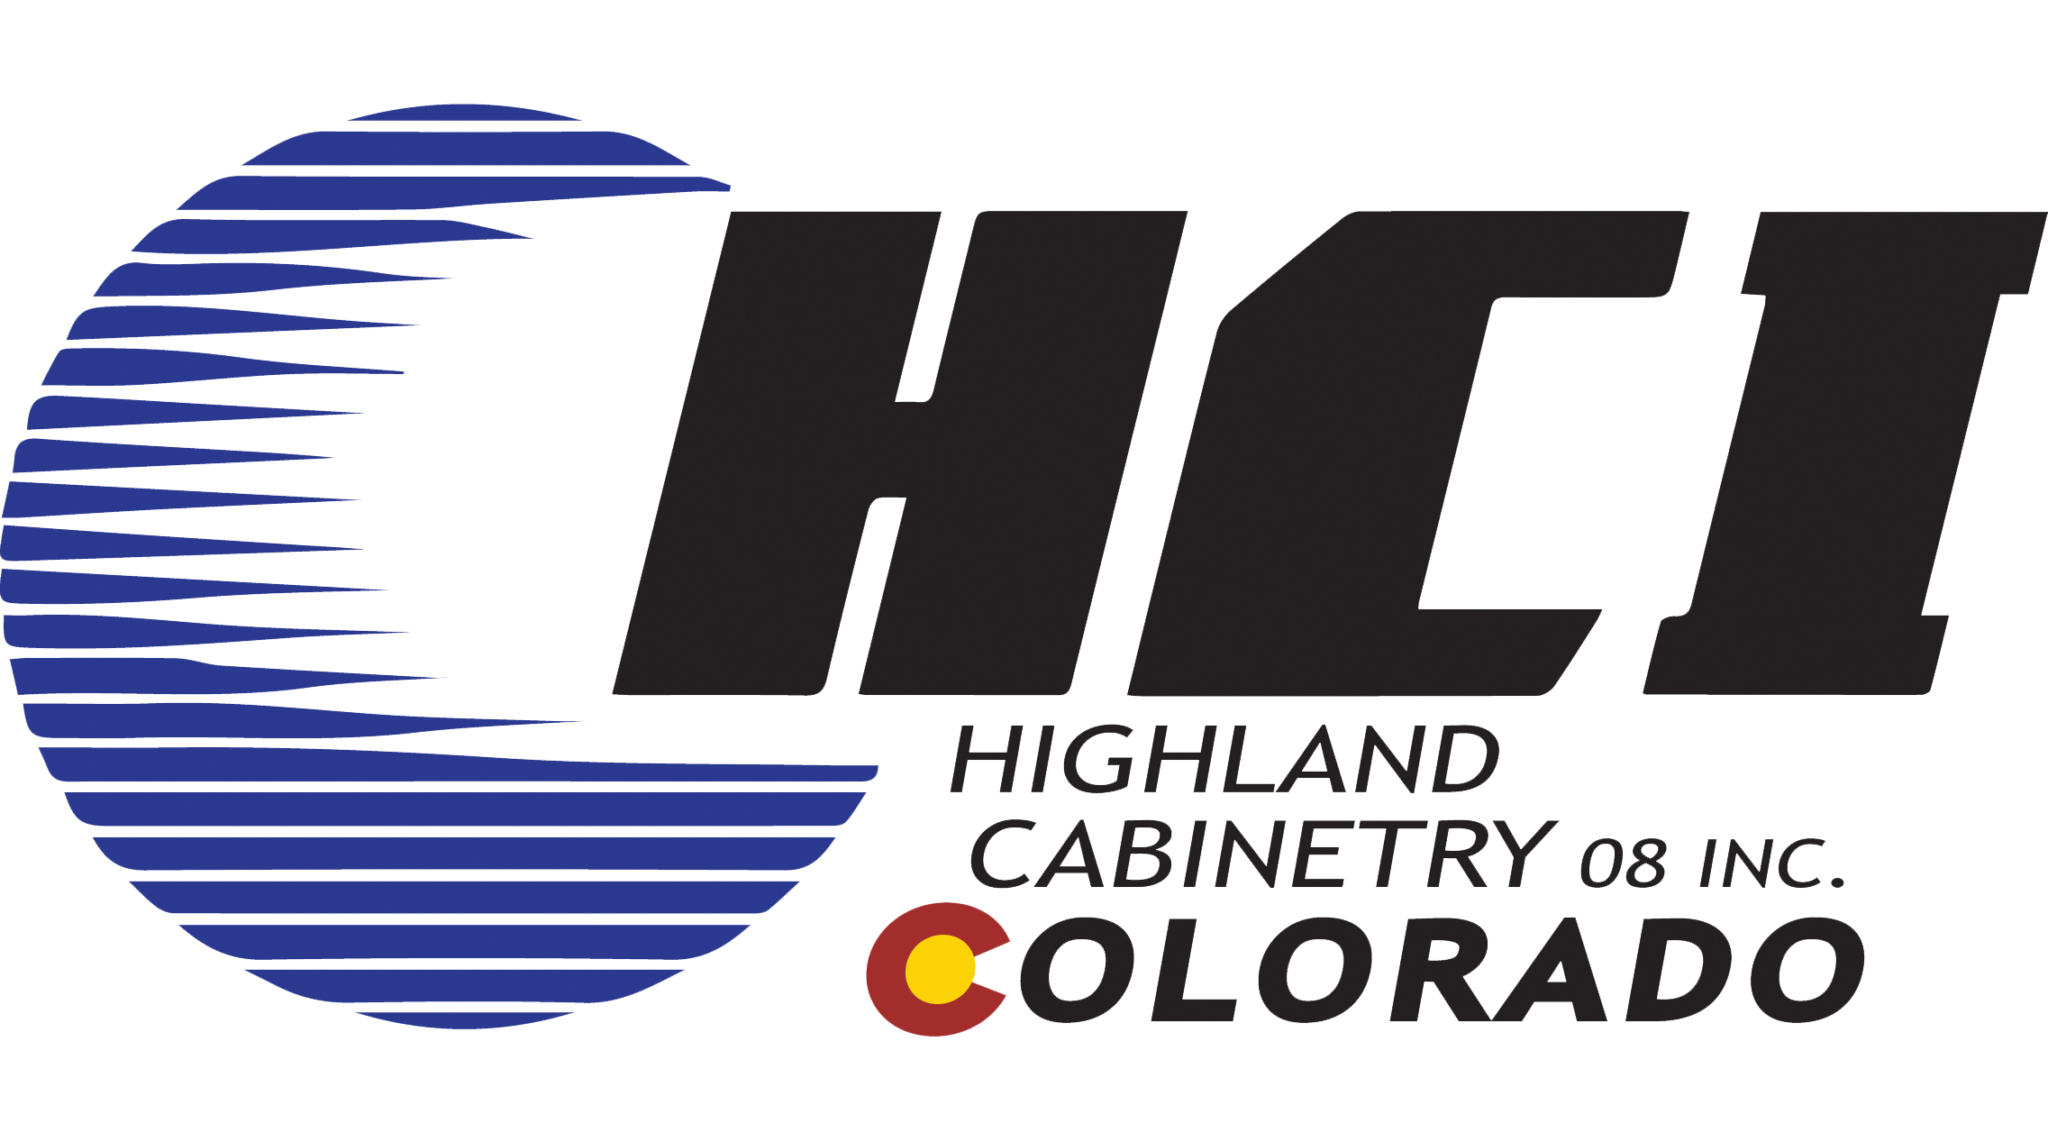 HIGHLAND CABINETRY CO